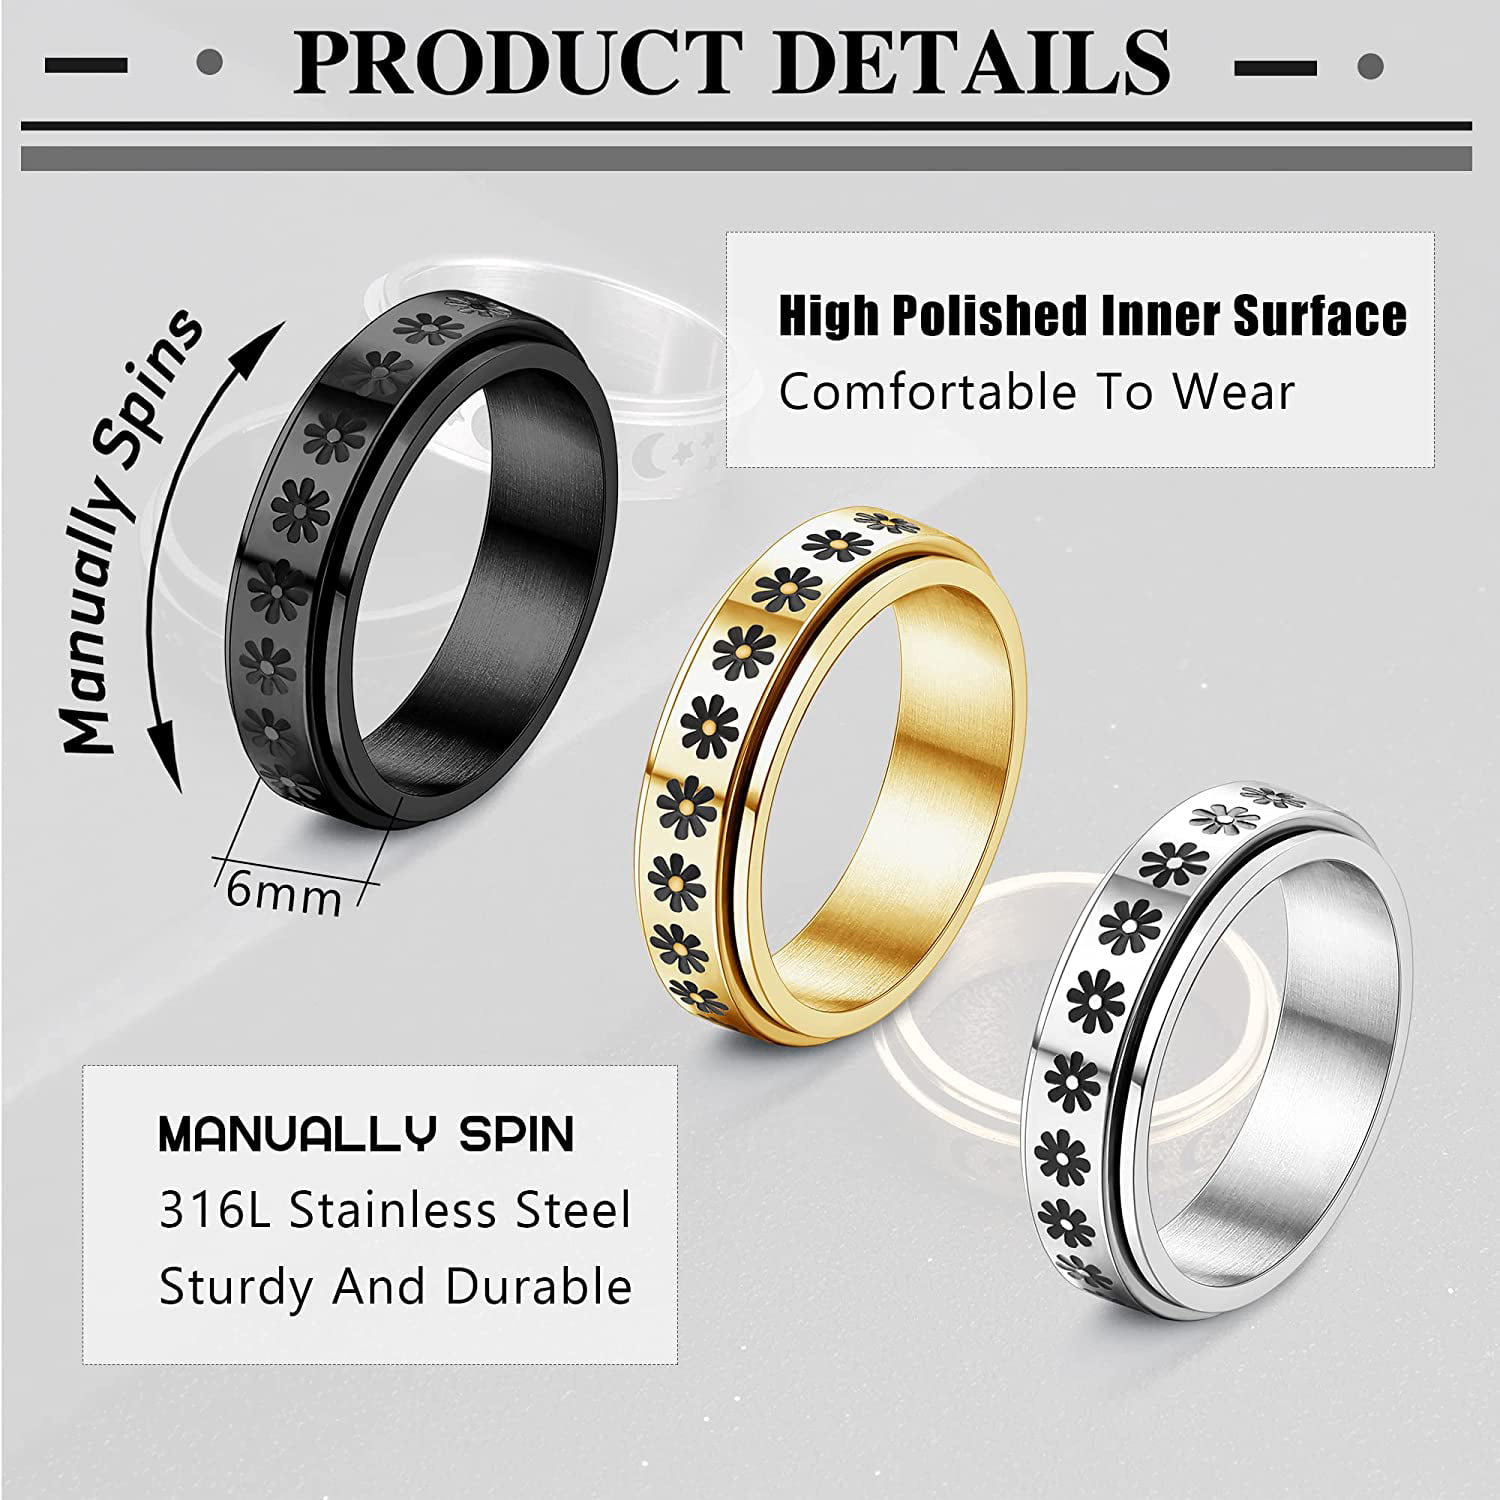 Jstyle 8Pcs Stainless Steel Band Rings for Men Women Wedding Ring Cool Fidget Spinner Ring Brushed Greek Key/Chain/Celtic Dragon Pattern Anxiety Sress Relief Wedding Promise Black Ring Set 